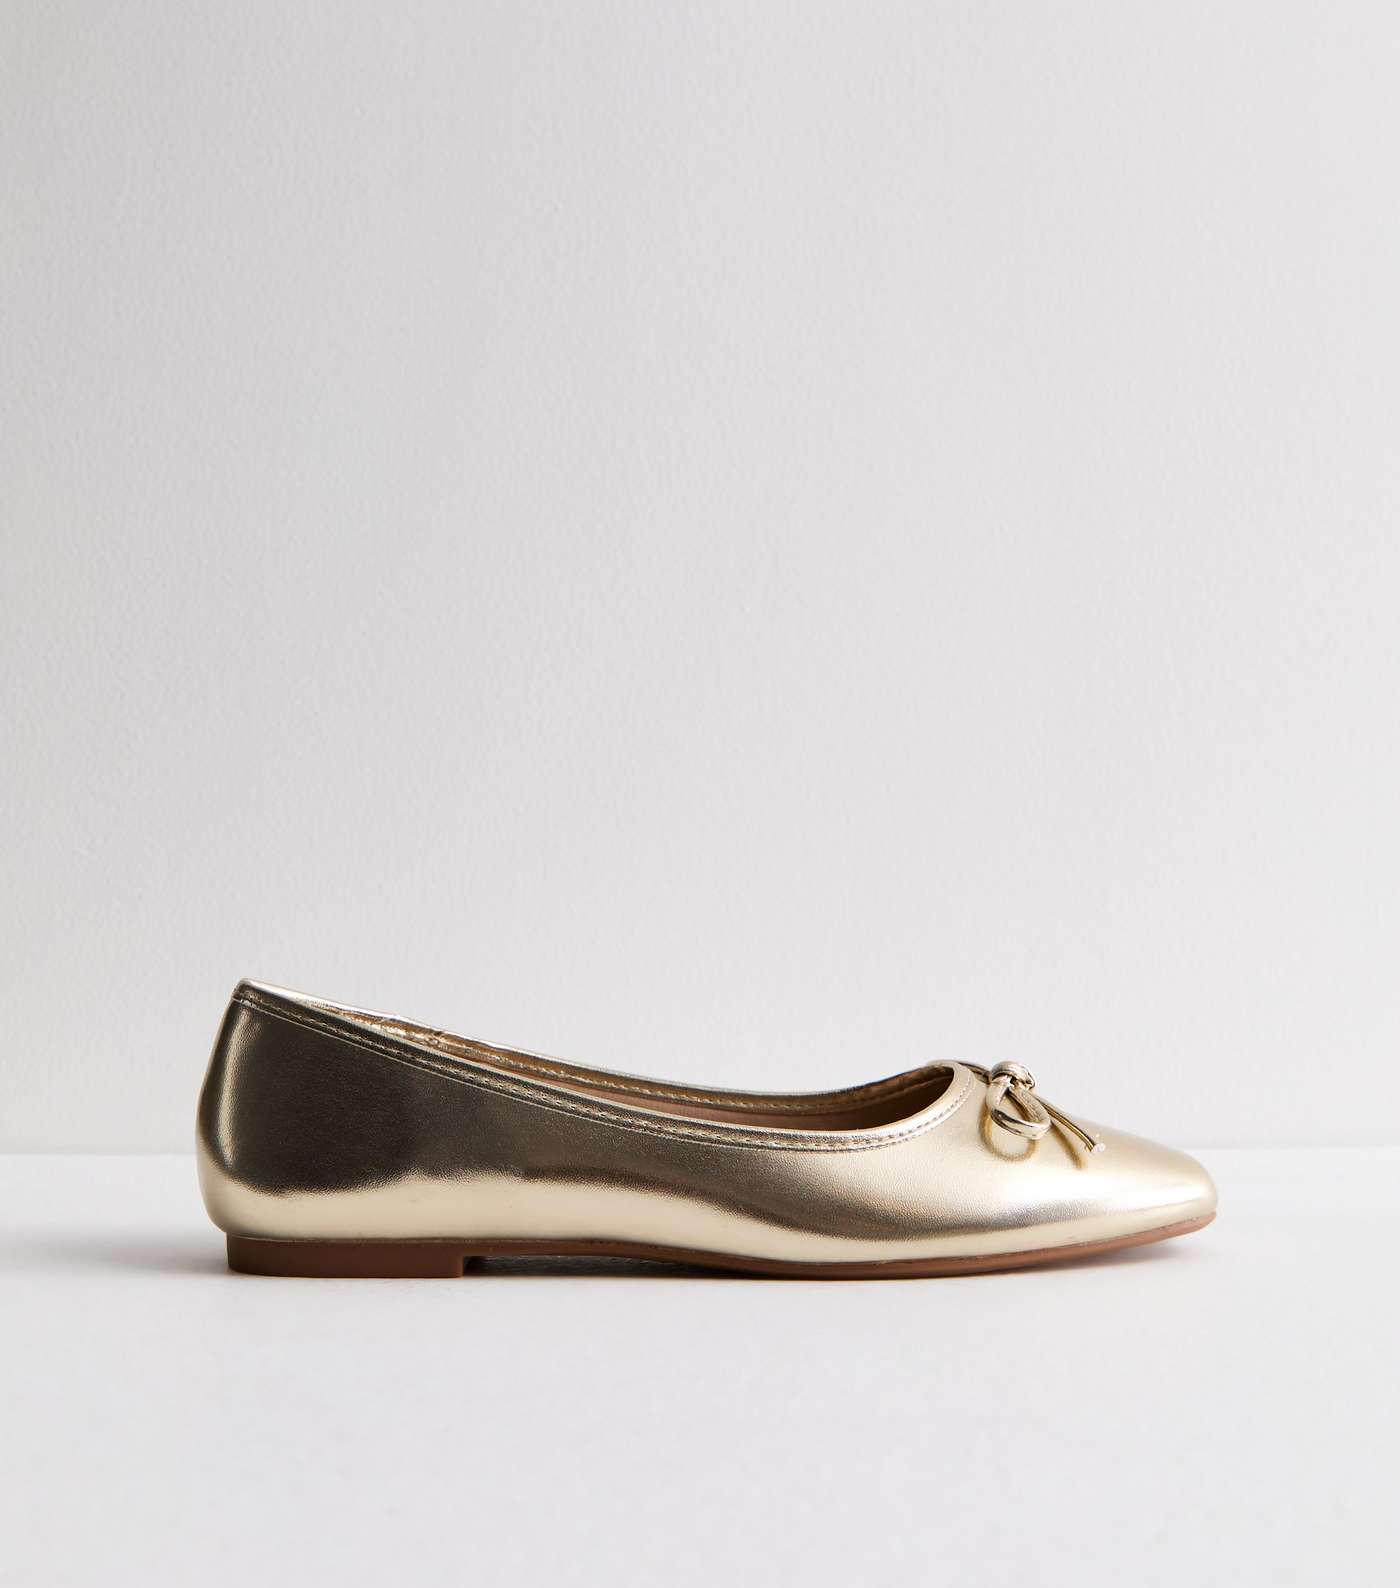 Truffle Gold Leather-Look Bow Ballerina Pumps Image 5